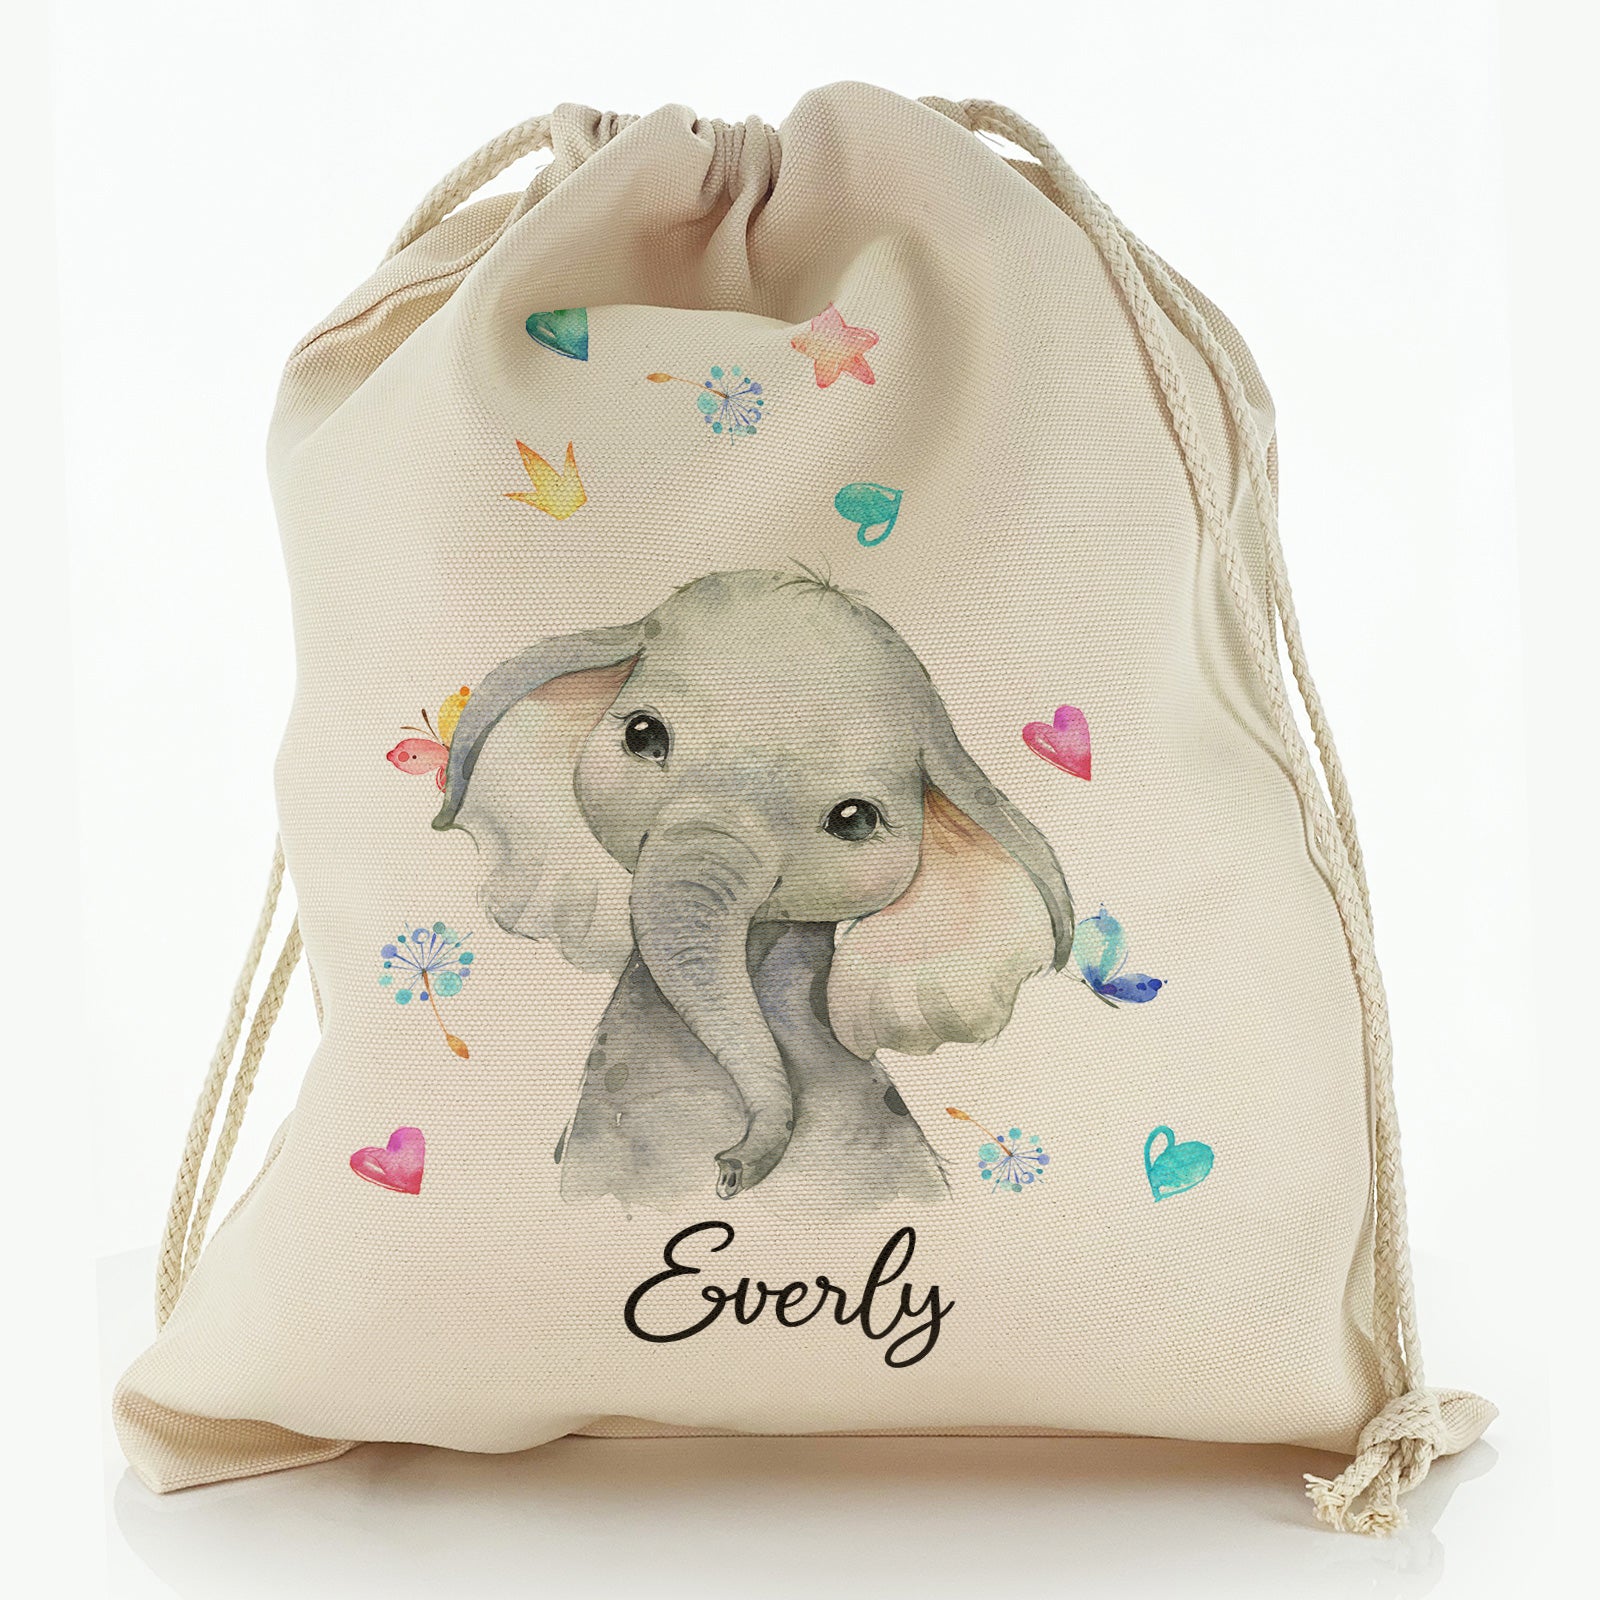 Personalised Canvas Sack with Grey Elephant with Hearts Stars Crowns Butterfly and Cute Text